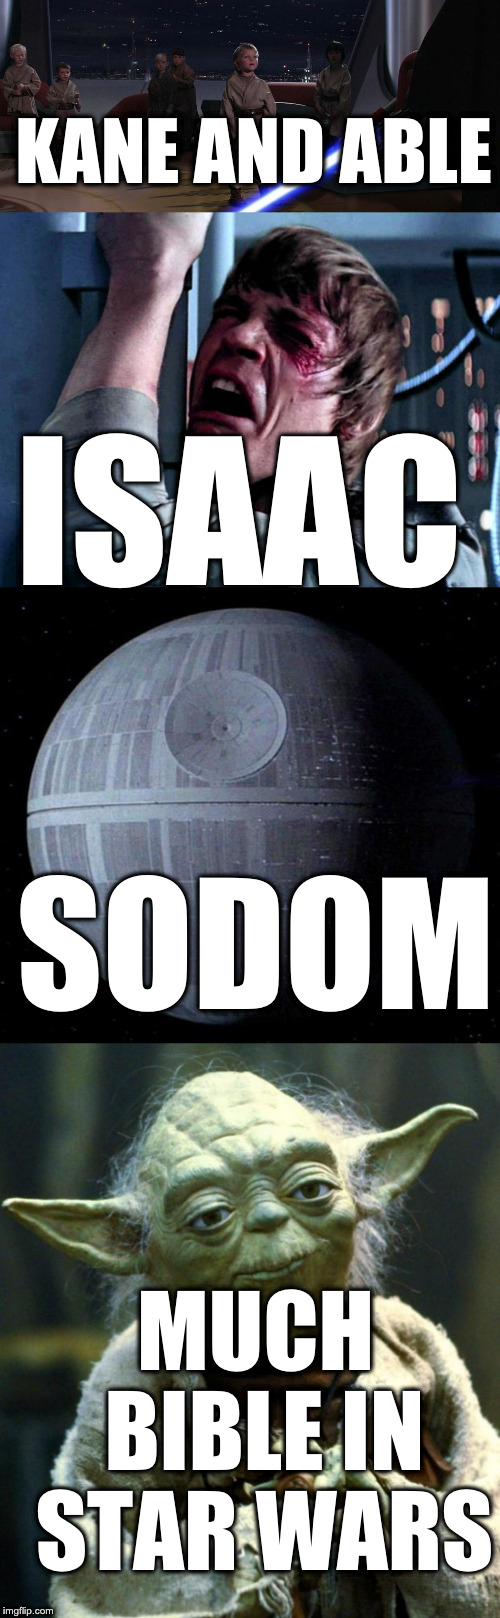 ISAAC SODOM KANE AND ABLE MUCH BIBLE IN STAR WARS | image tagged in memes,star wars yoda,luke skywalker no era penal,death star,younglings | made w/ Imgflip meme maker